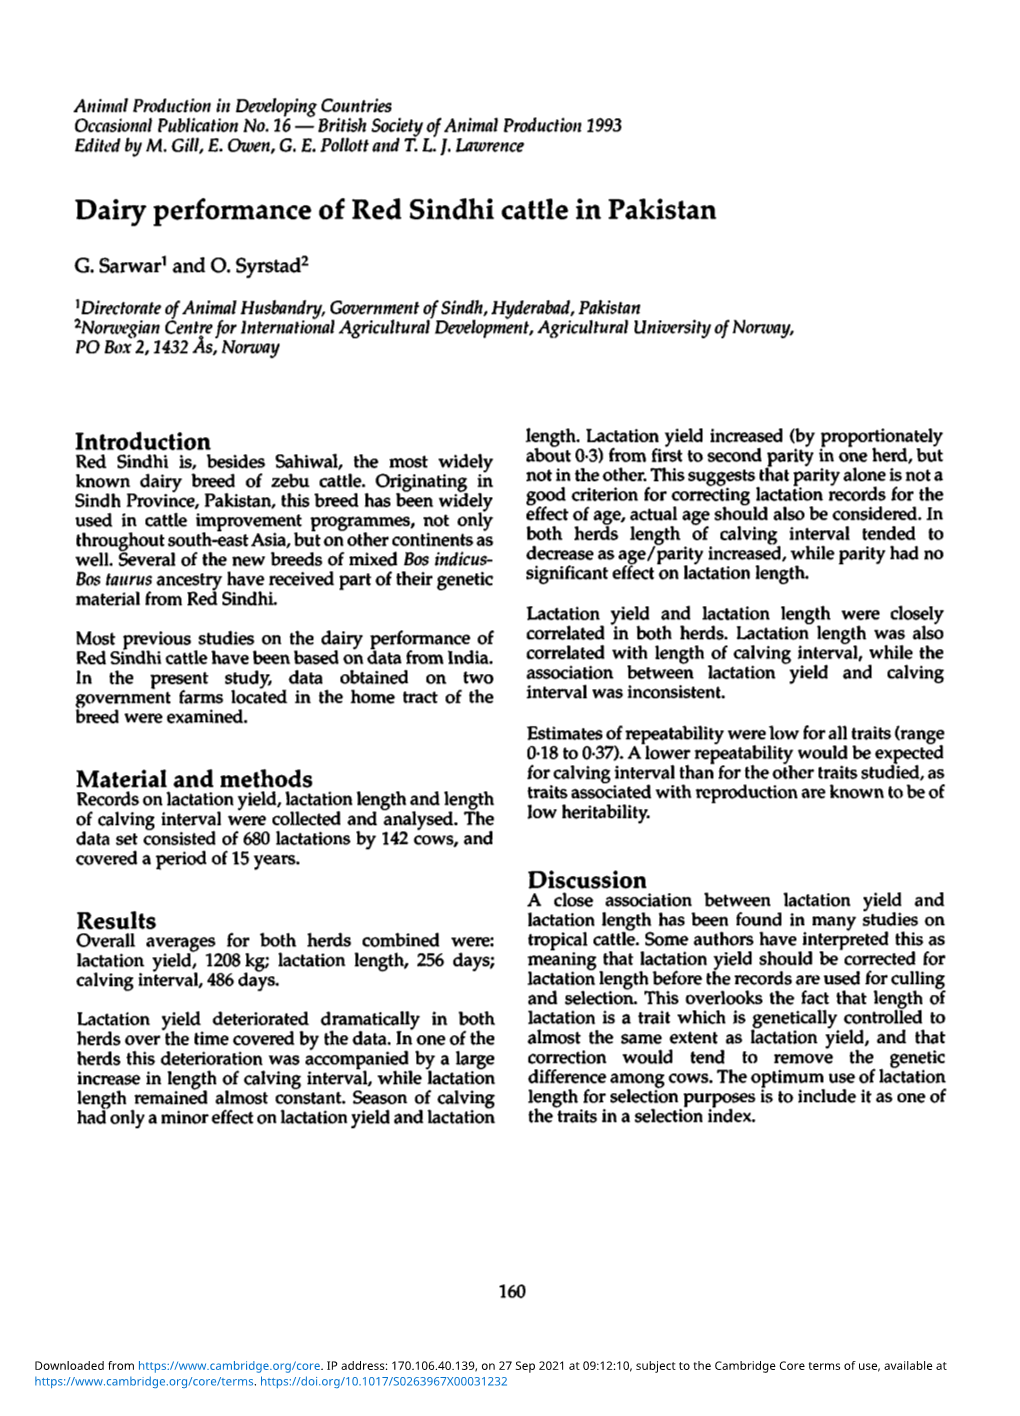 Dairy Performance of Red Sindhi Cattle in Pakistan